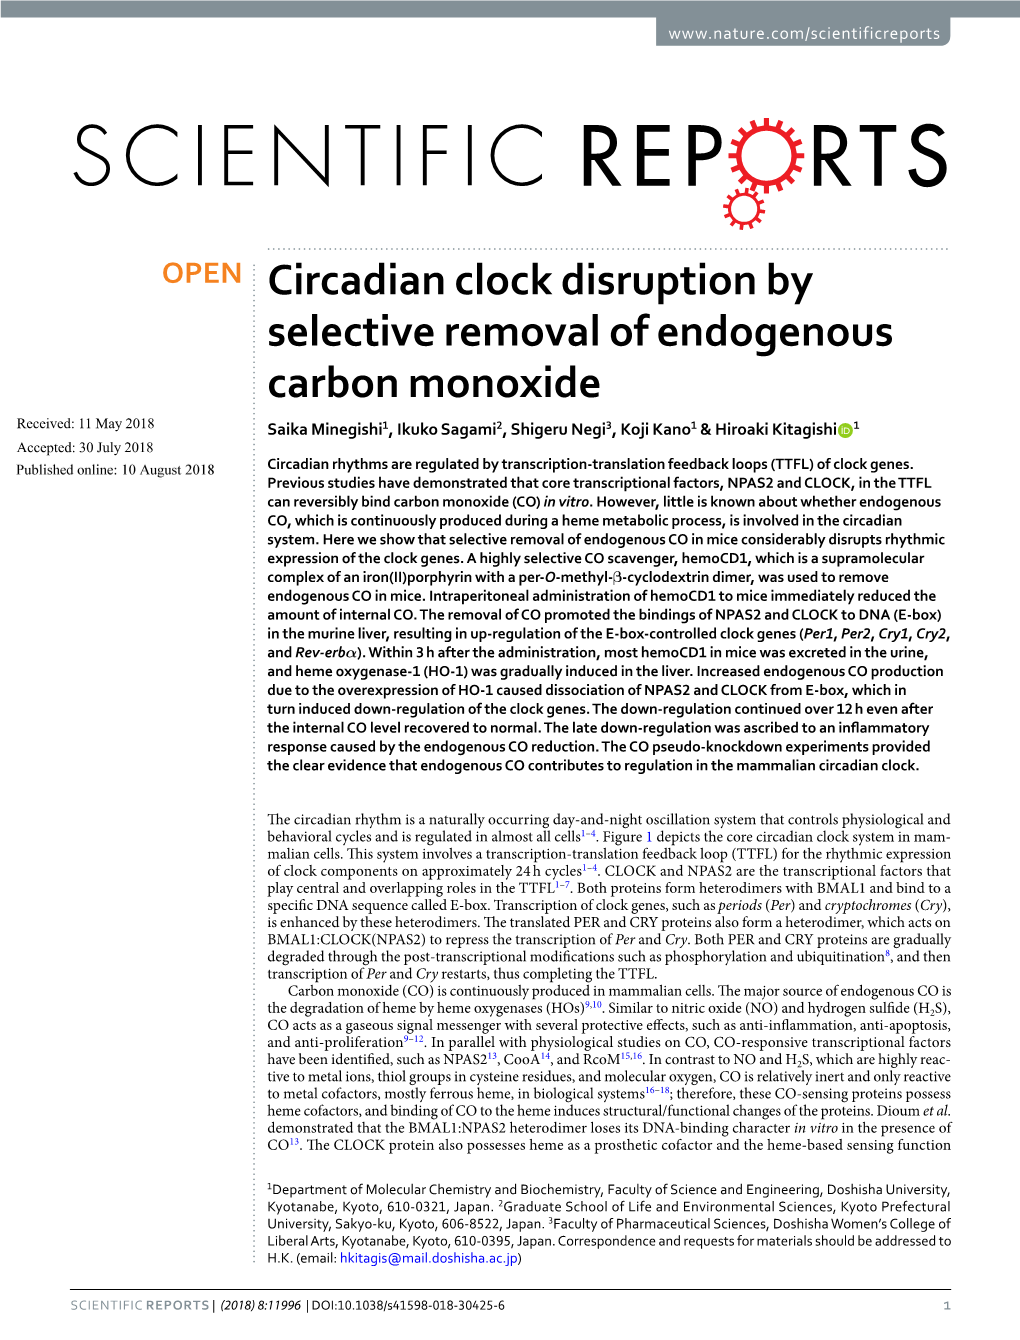 Circadian Clock Disruption by Selective Removal of Endogenous Carbon